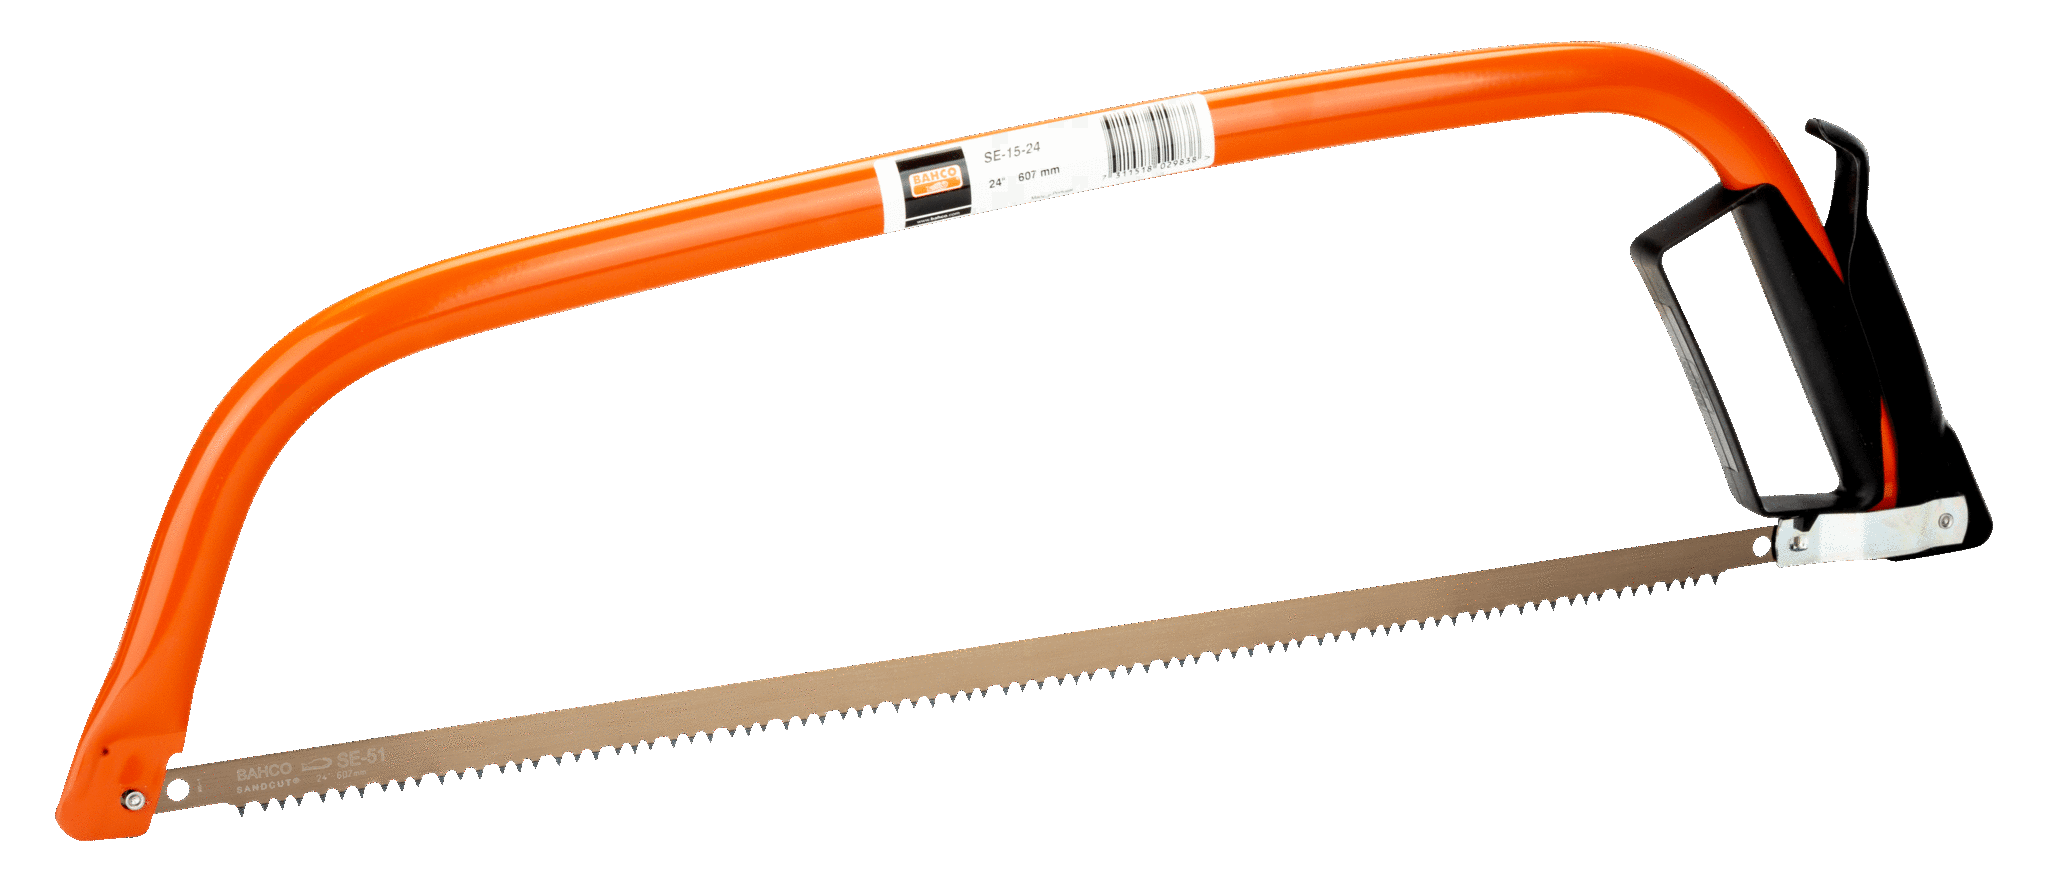 Bahco Bahco General Purpose Bow Saw with 51 Toothed Blade 24" 